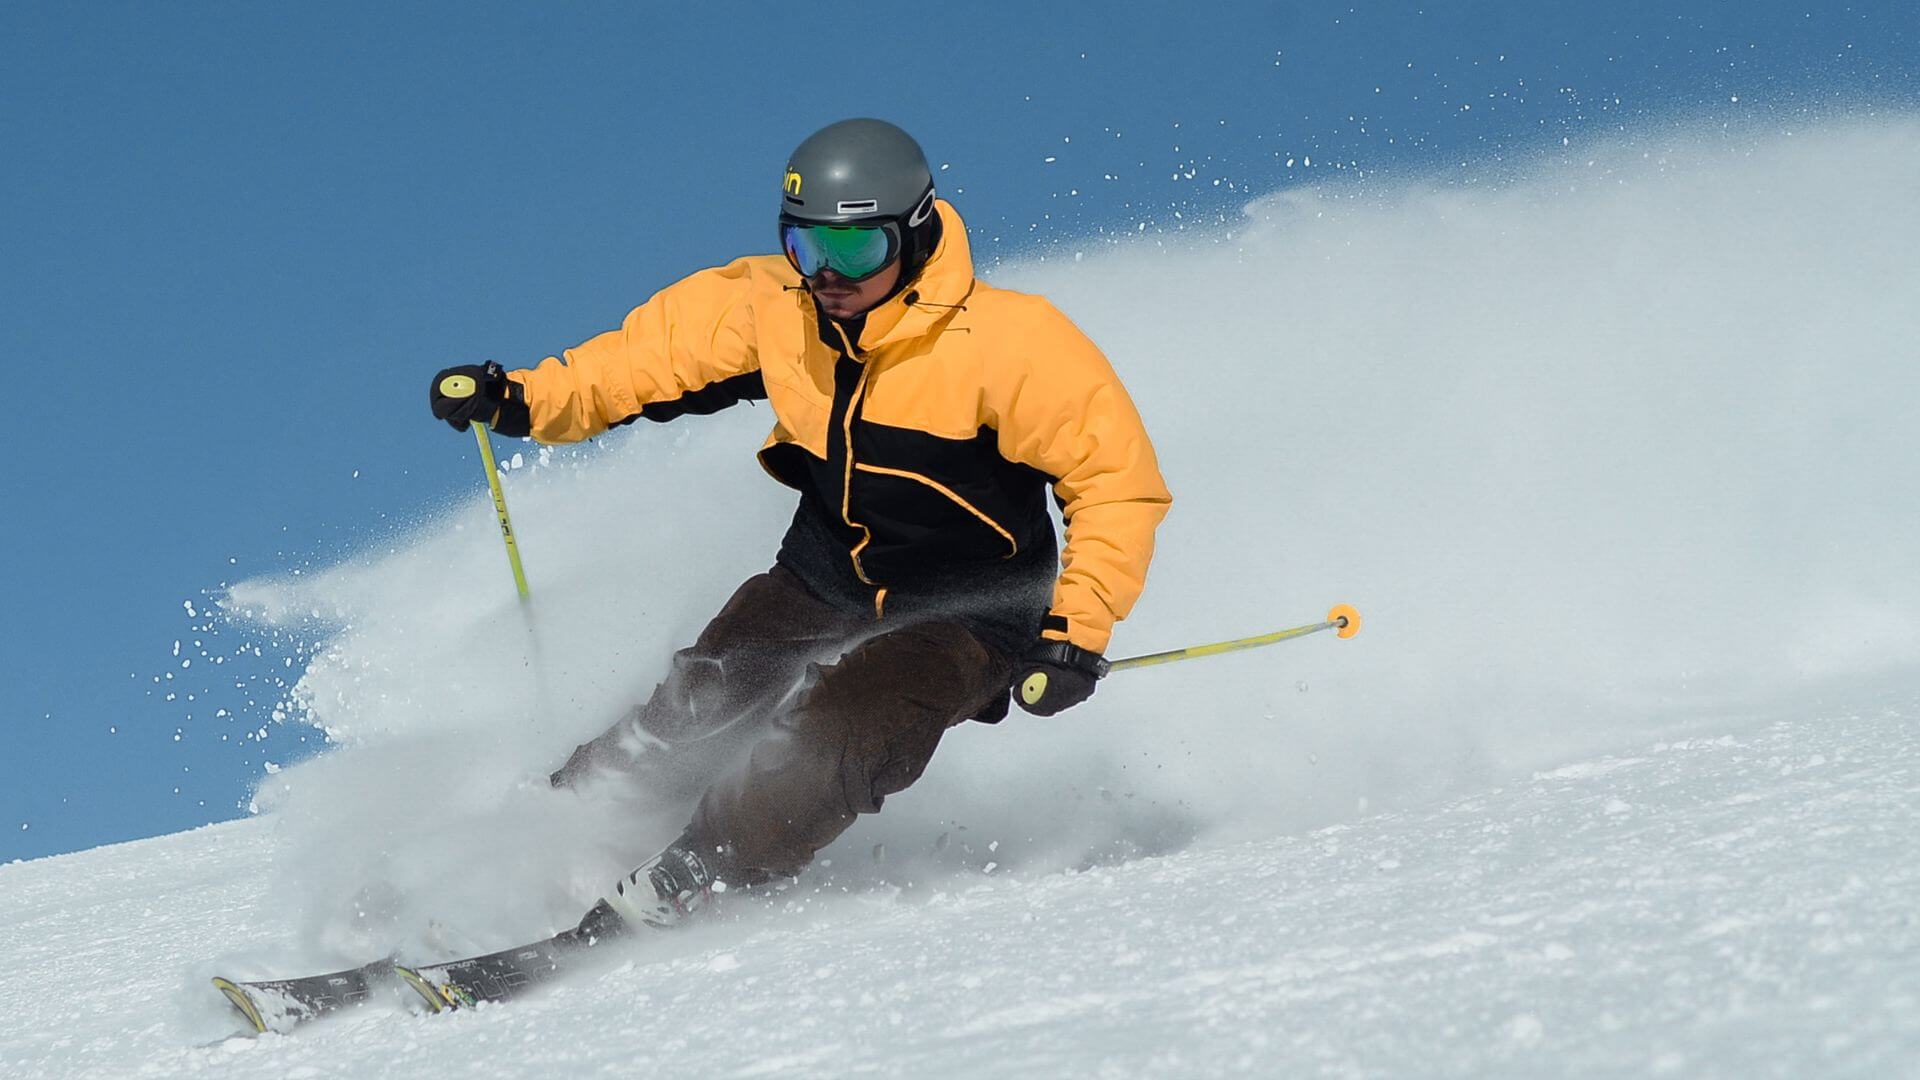 Man in Gold and Black jacket wearing gray helmet and goggles skiing downhill with snow blowing.